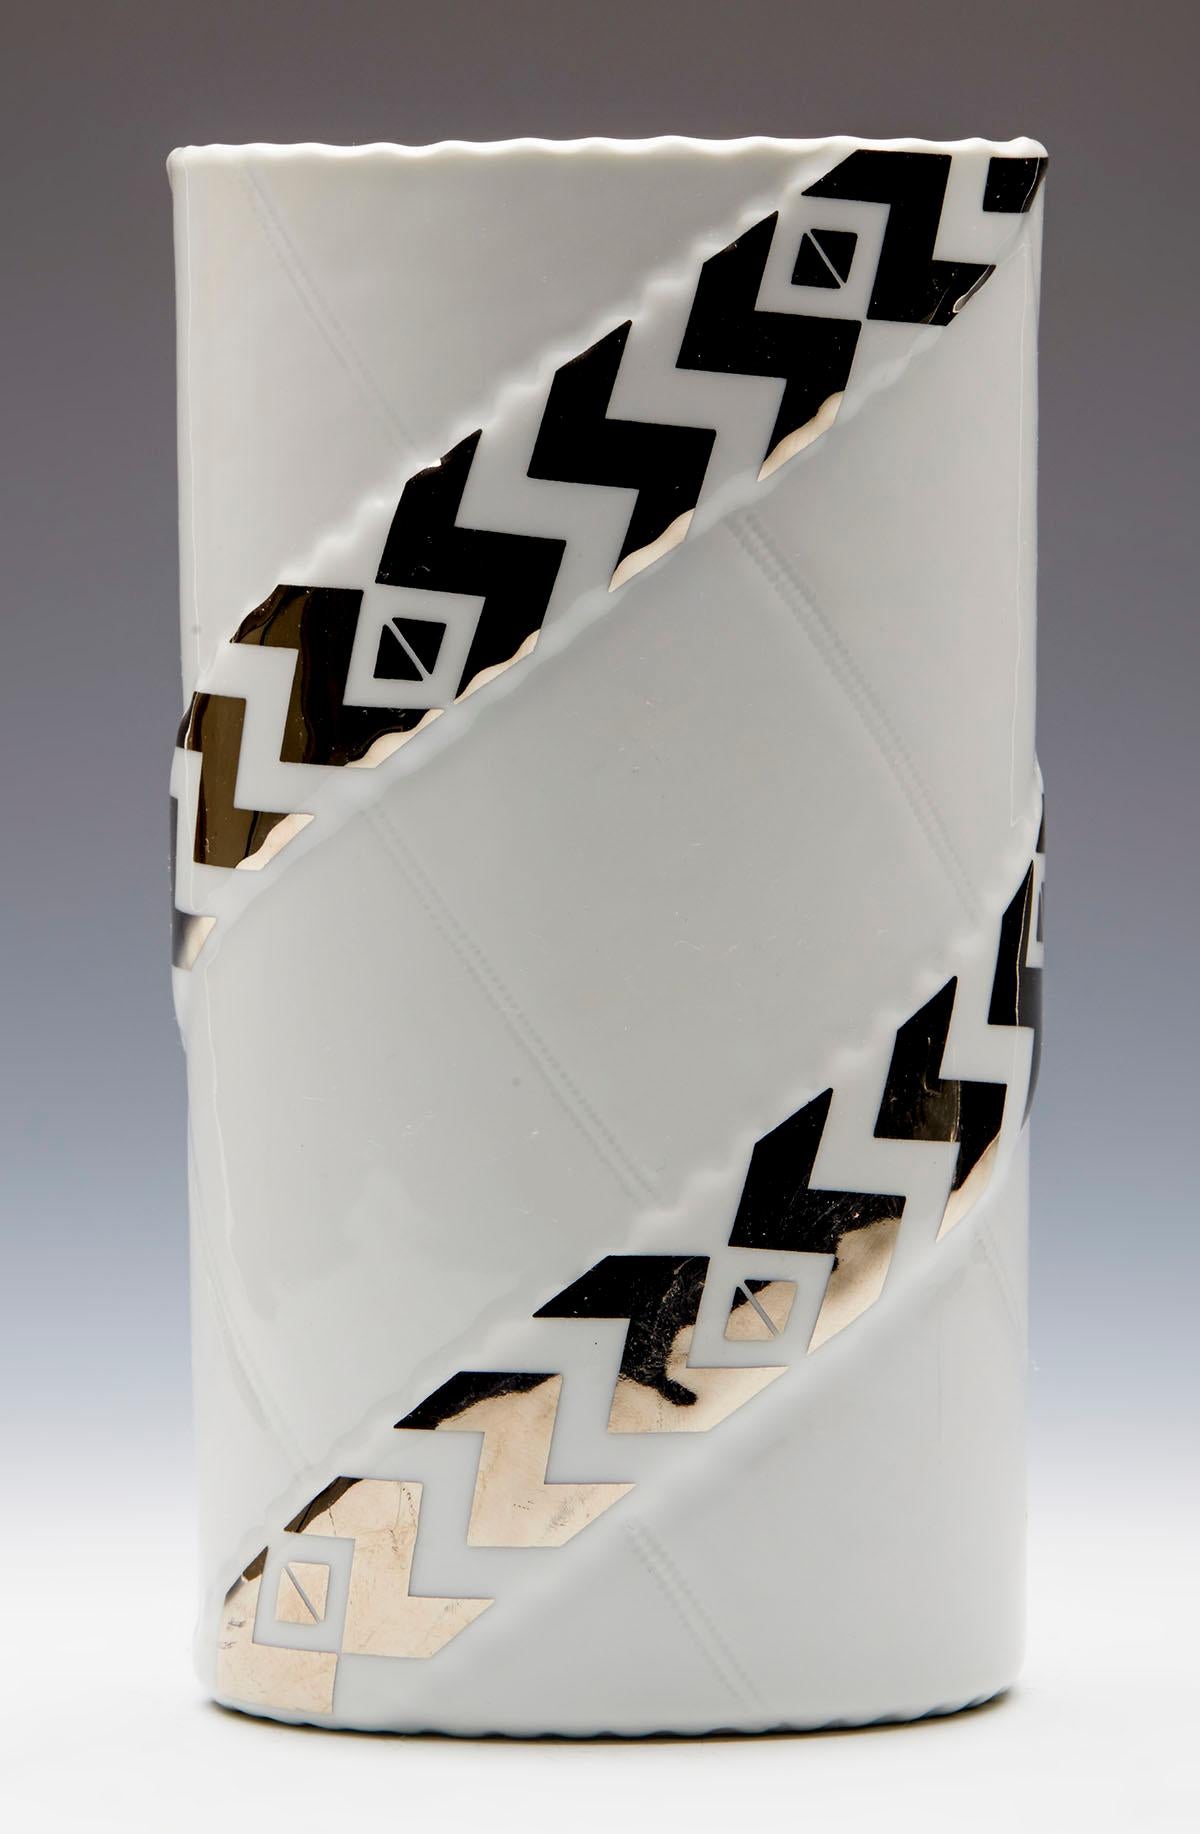 A very stylish Danish Royal Copenhagen Zenit pattern ceramic art vase designed by Anne-Marie Trolle (b. 1944) and dating from around 1980. The vase is of tall oval shape standing on an unglazed oval shaped base with hand applied designs. The body is